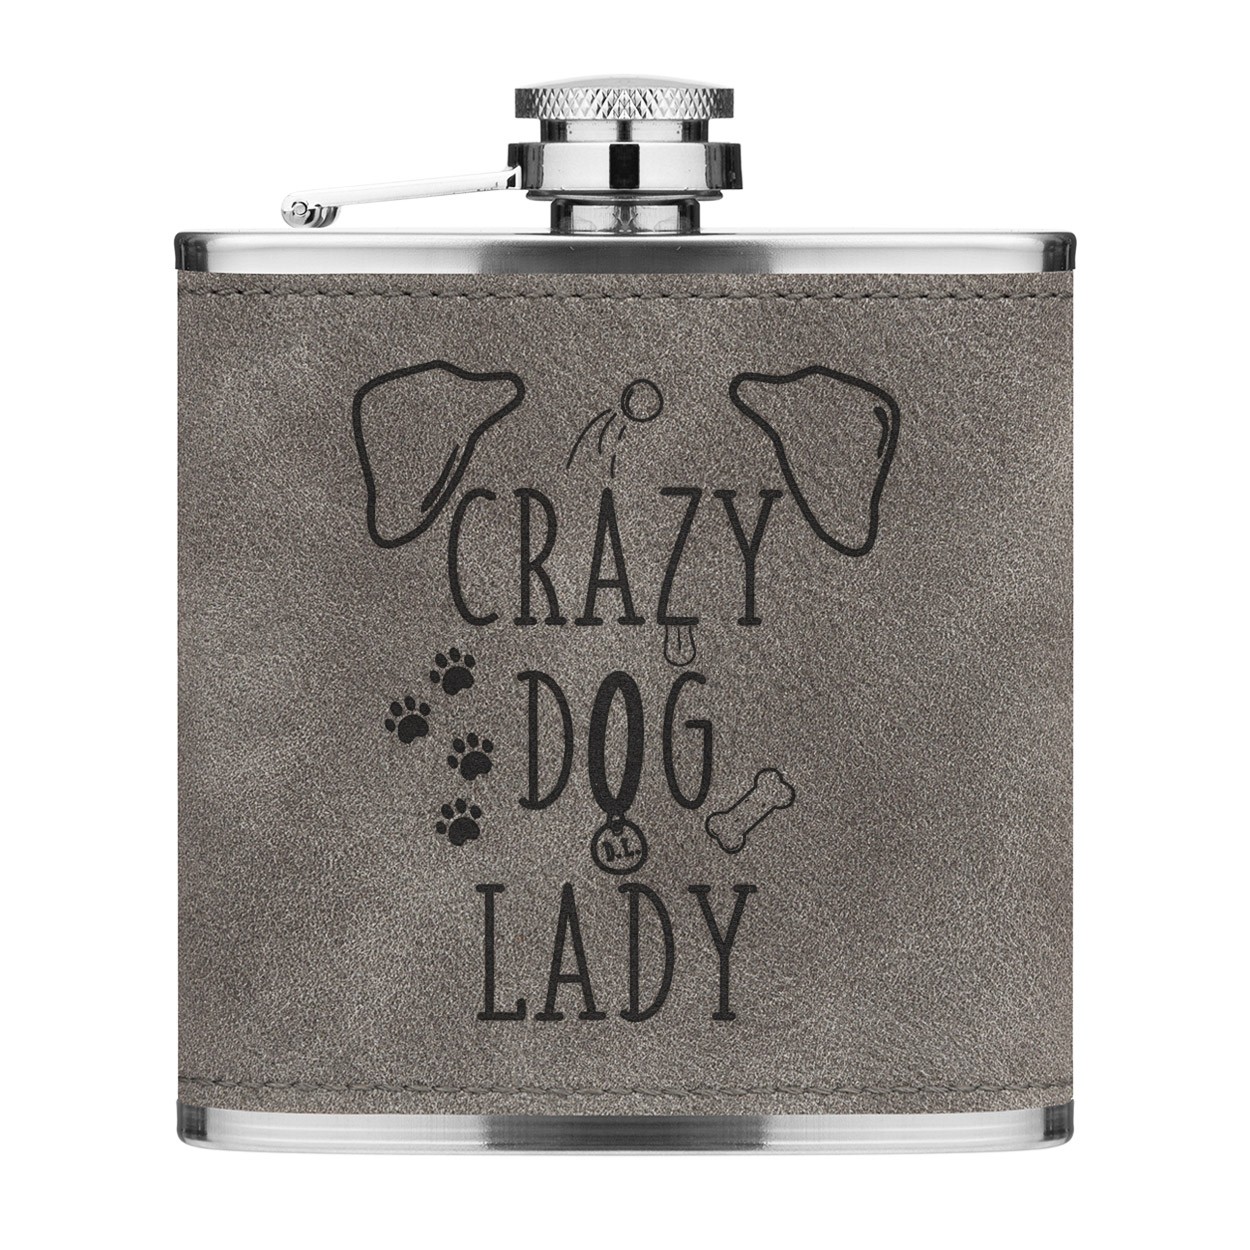 Crazy Dog Lady Brown Ears 6oz PU Leather Hip Flask Grey Luxe